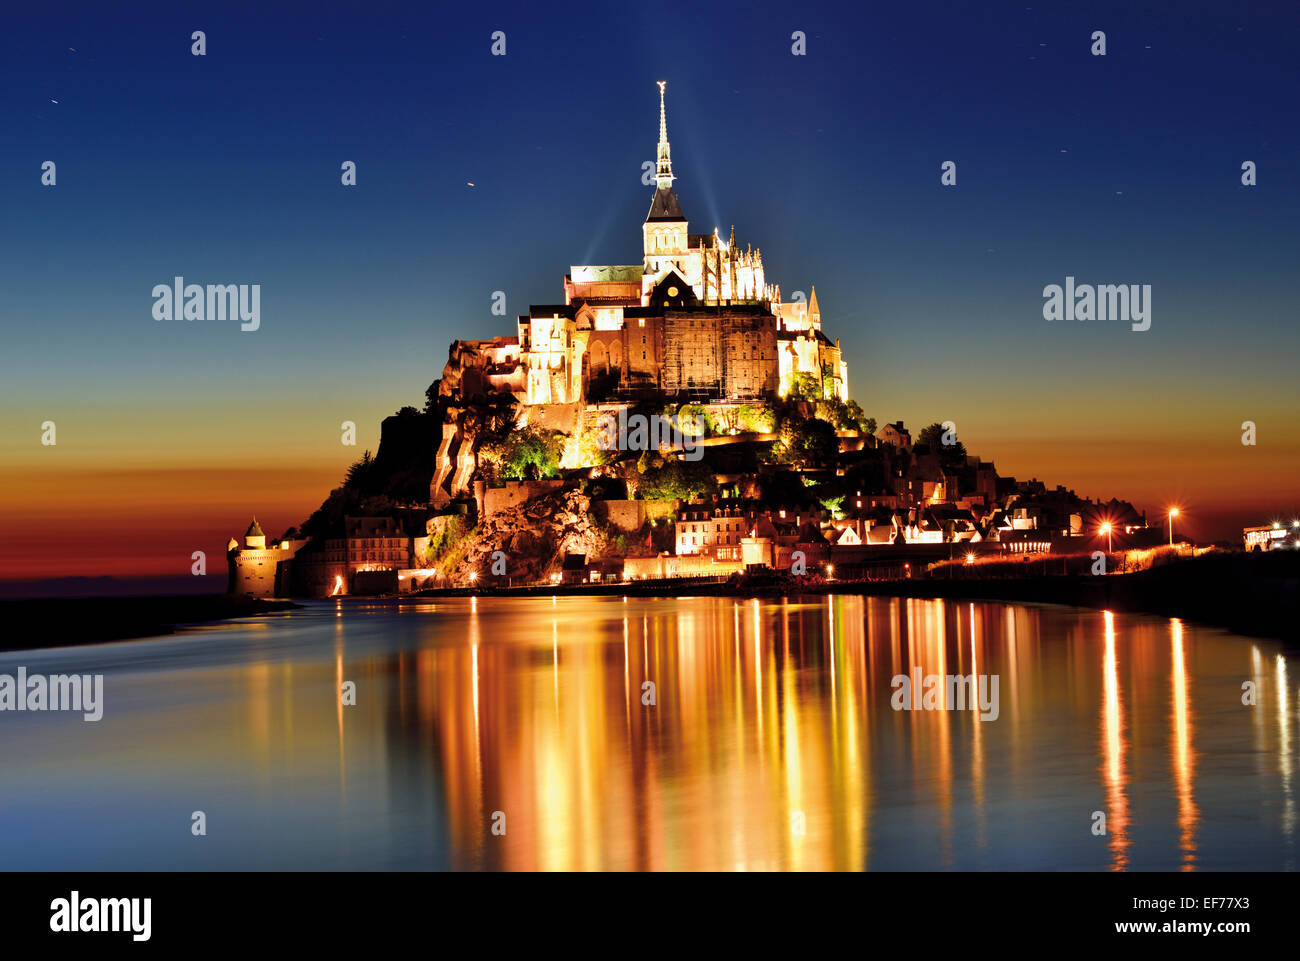 France, Normandy: Scenic view of Le Mont St. Michel by night Stock Photo